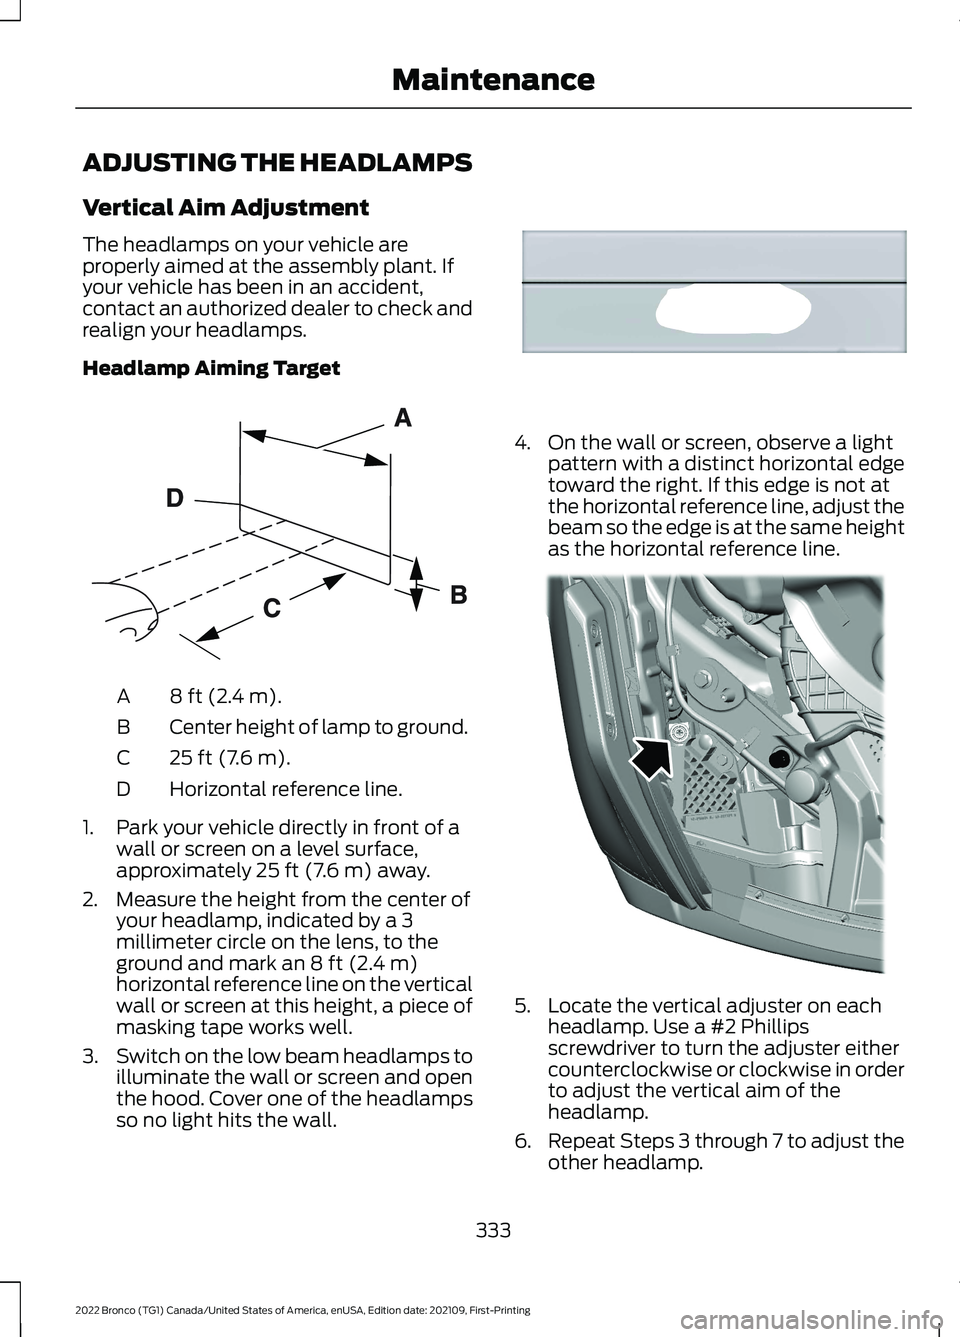 FORD BRONCO 2022  Owners Manual ADJUSTING THE HEADLAMPS
Vertical Aim Adjustment
The headlamps on your vehicle areproperly aimed at the assembly plant. Ifyour vehicle has been in an accident,contact an authorized dealer to check andr